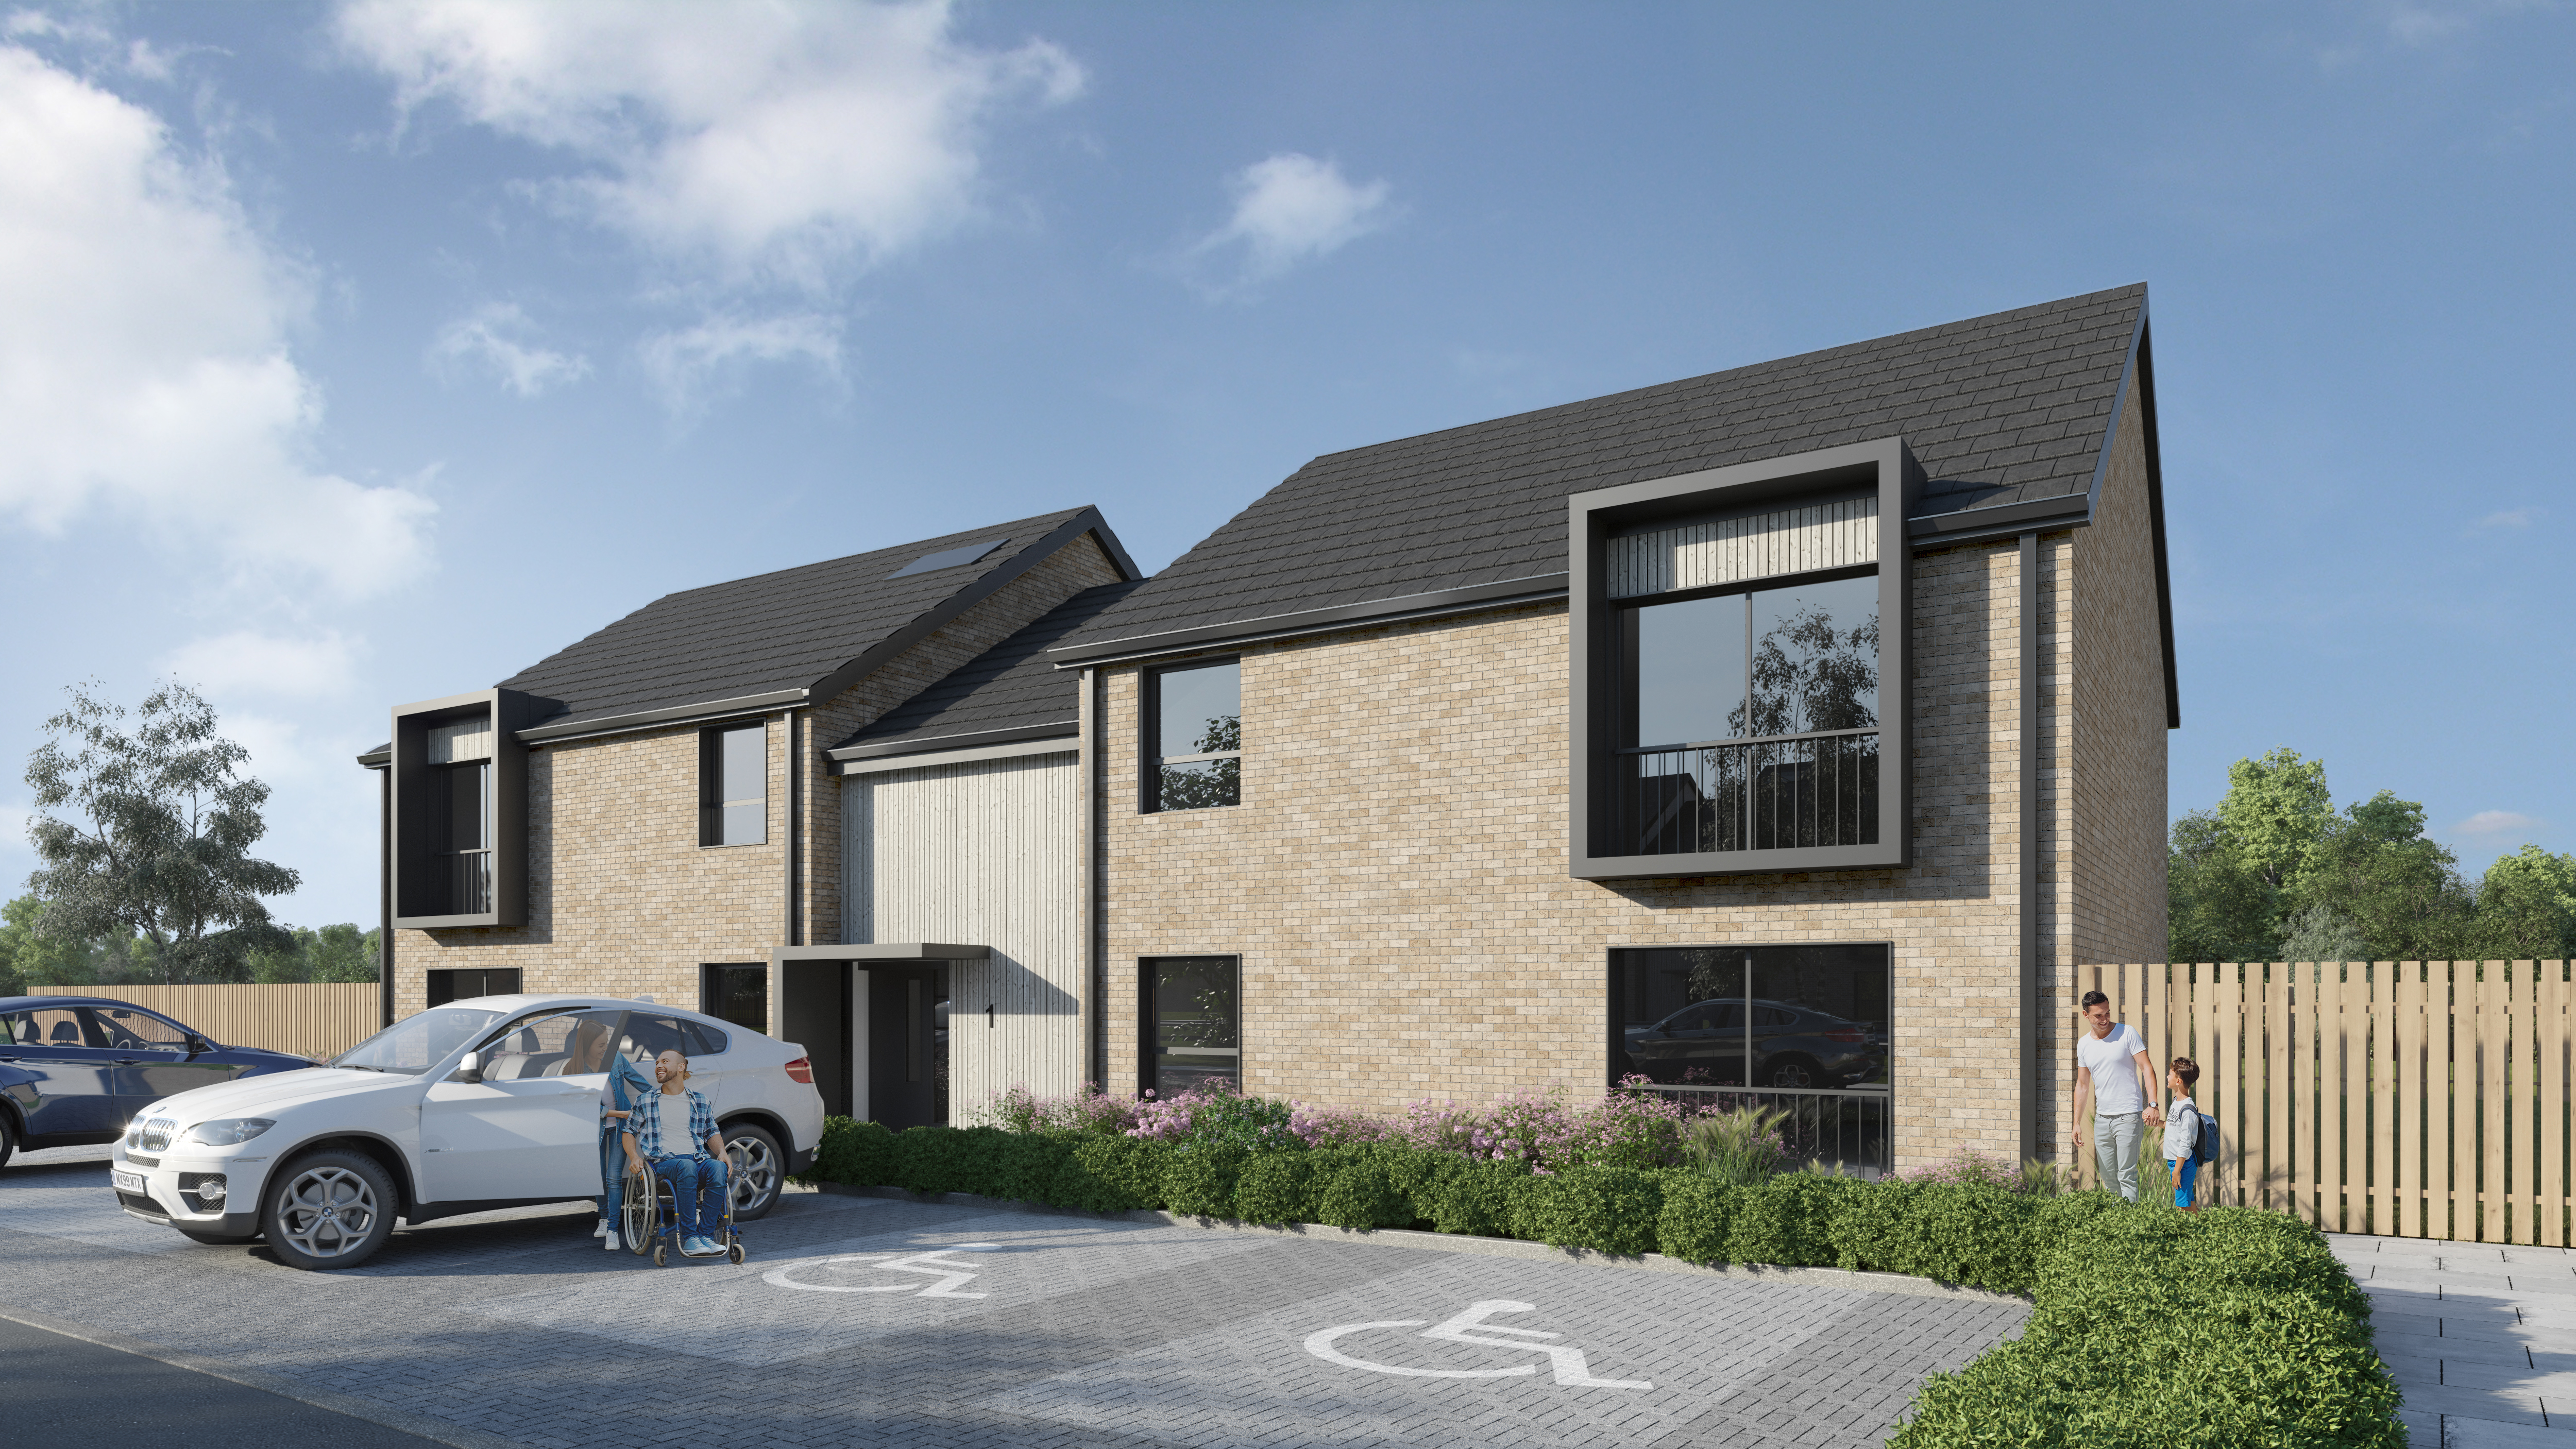 Campion Homes appointed to deliver 66 specialist homes in Dundee